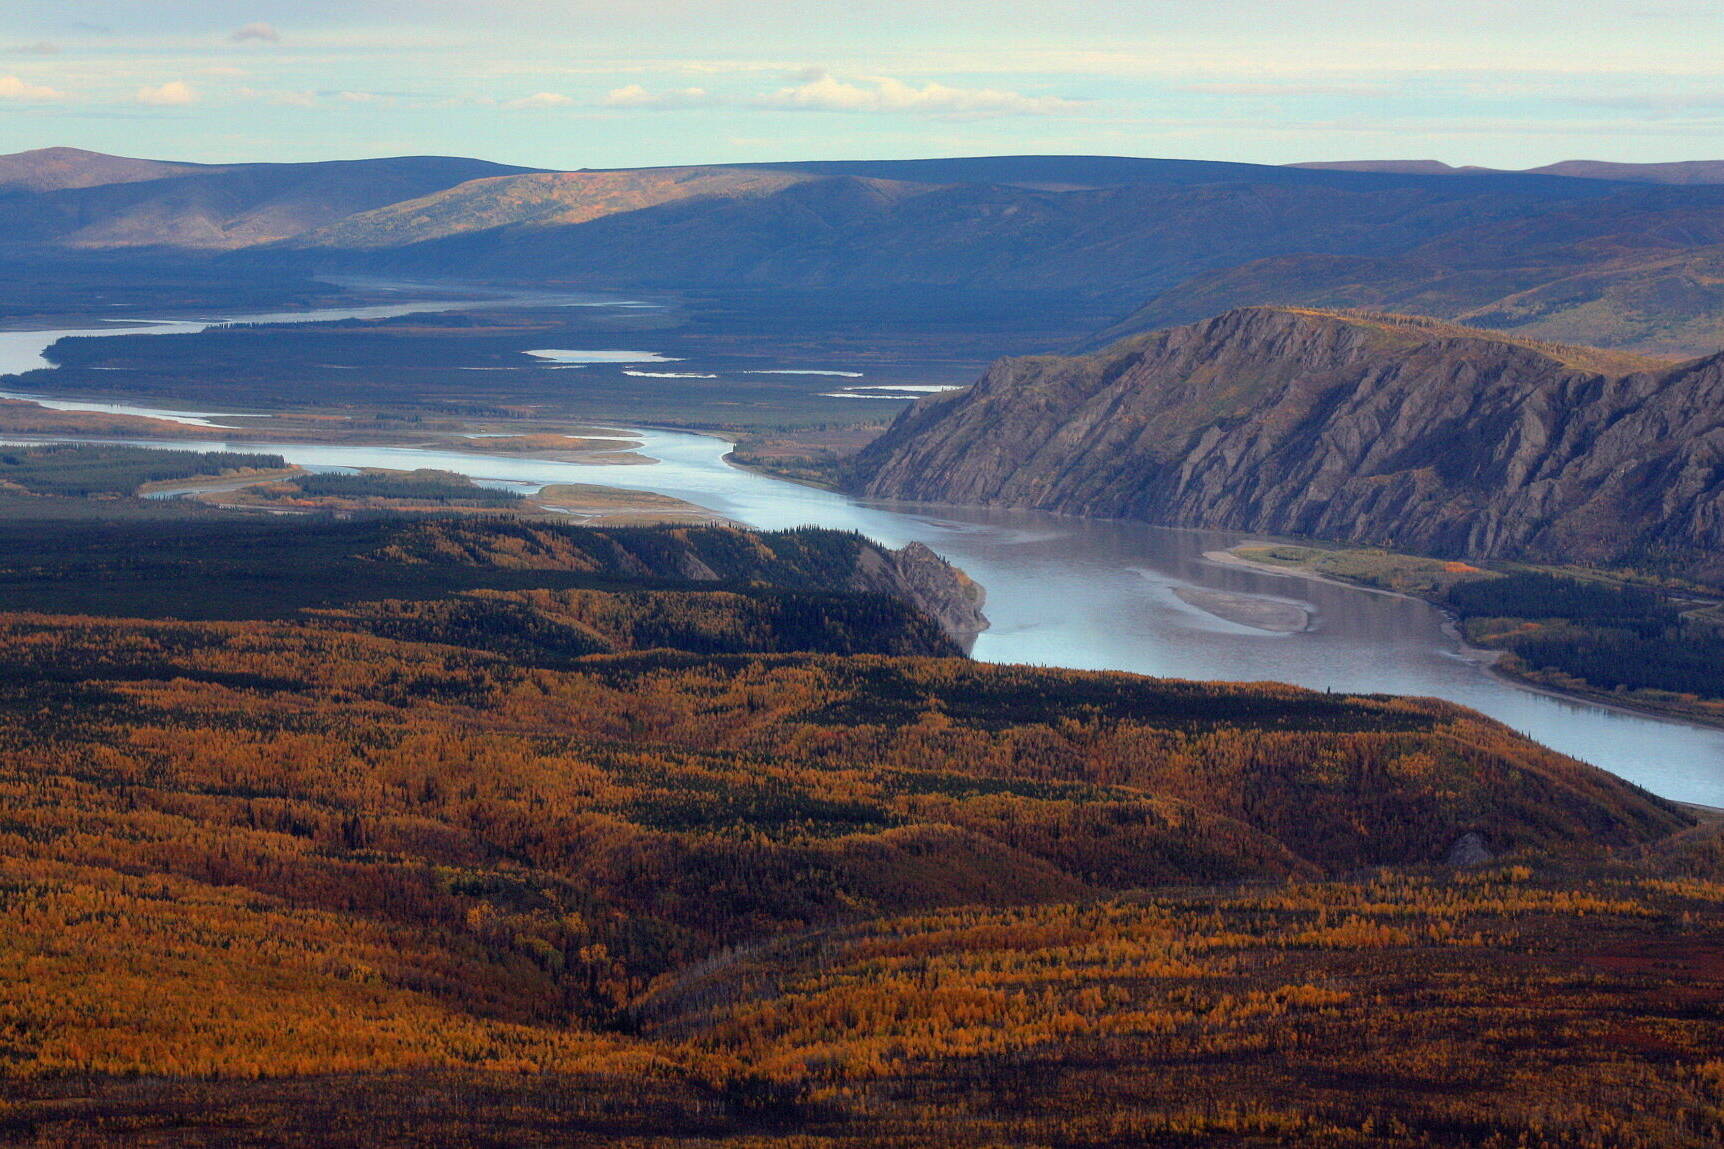 A section of the upper Yukon River flowing through the Yukon-Charley Rivers National Preserve is seen on Sept. 10, 2012. The river flows through Alaska into Canada. (National Park Service photo)